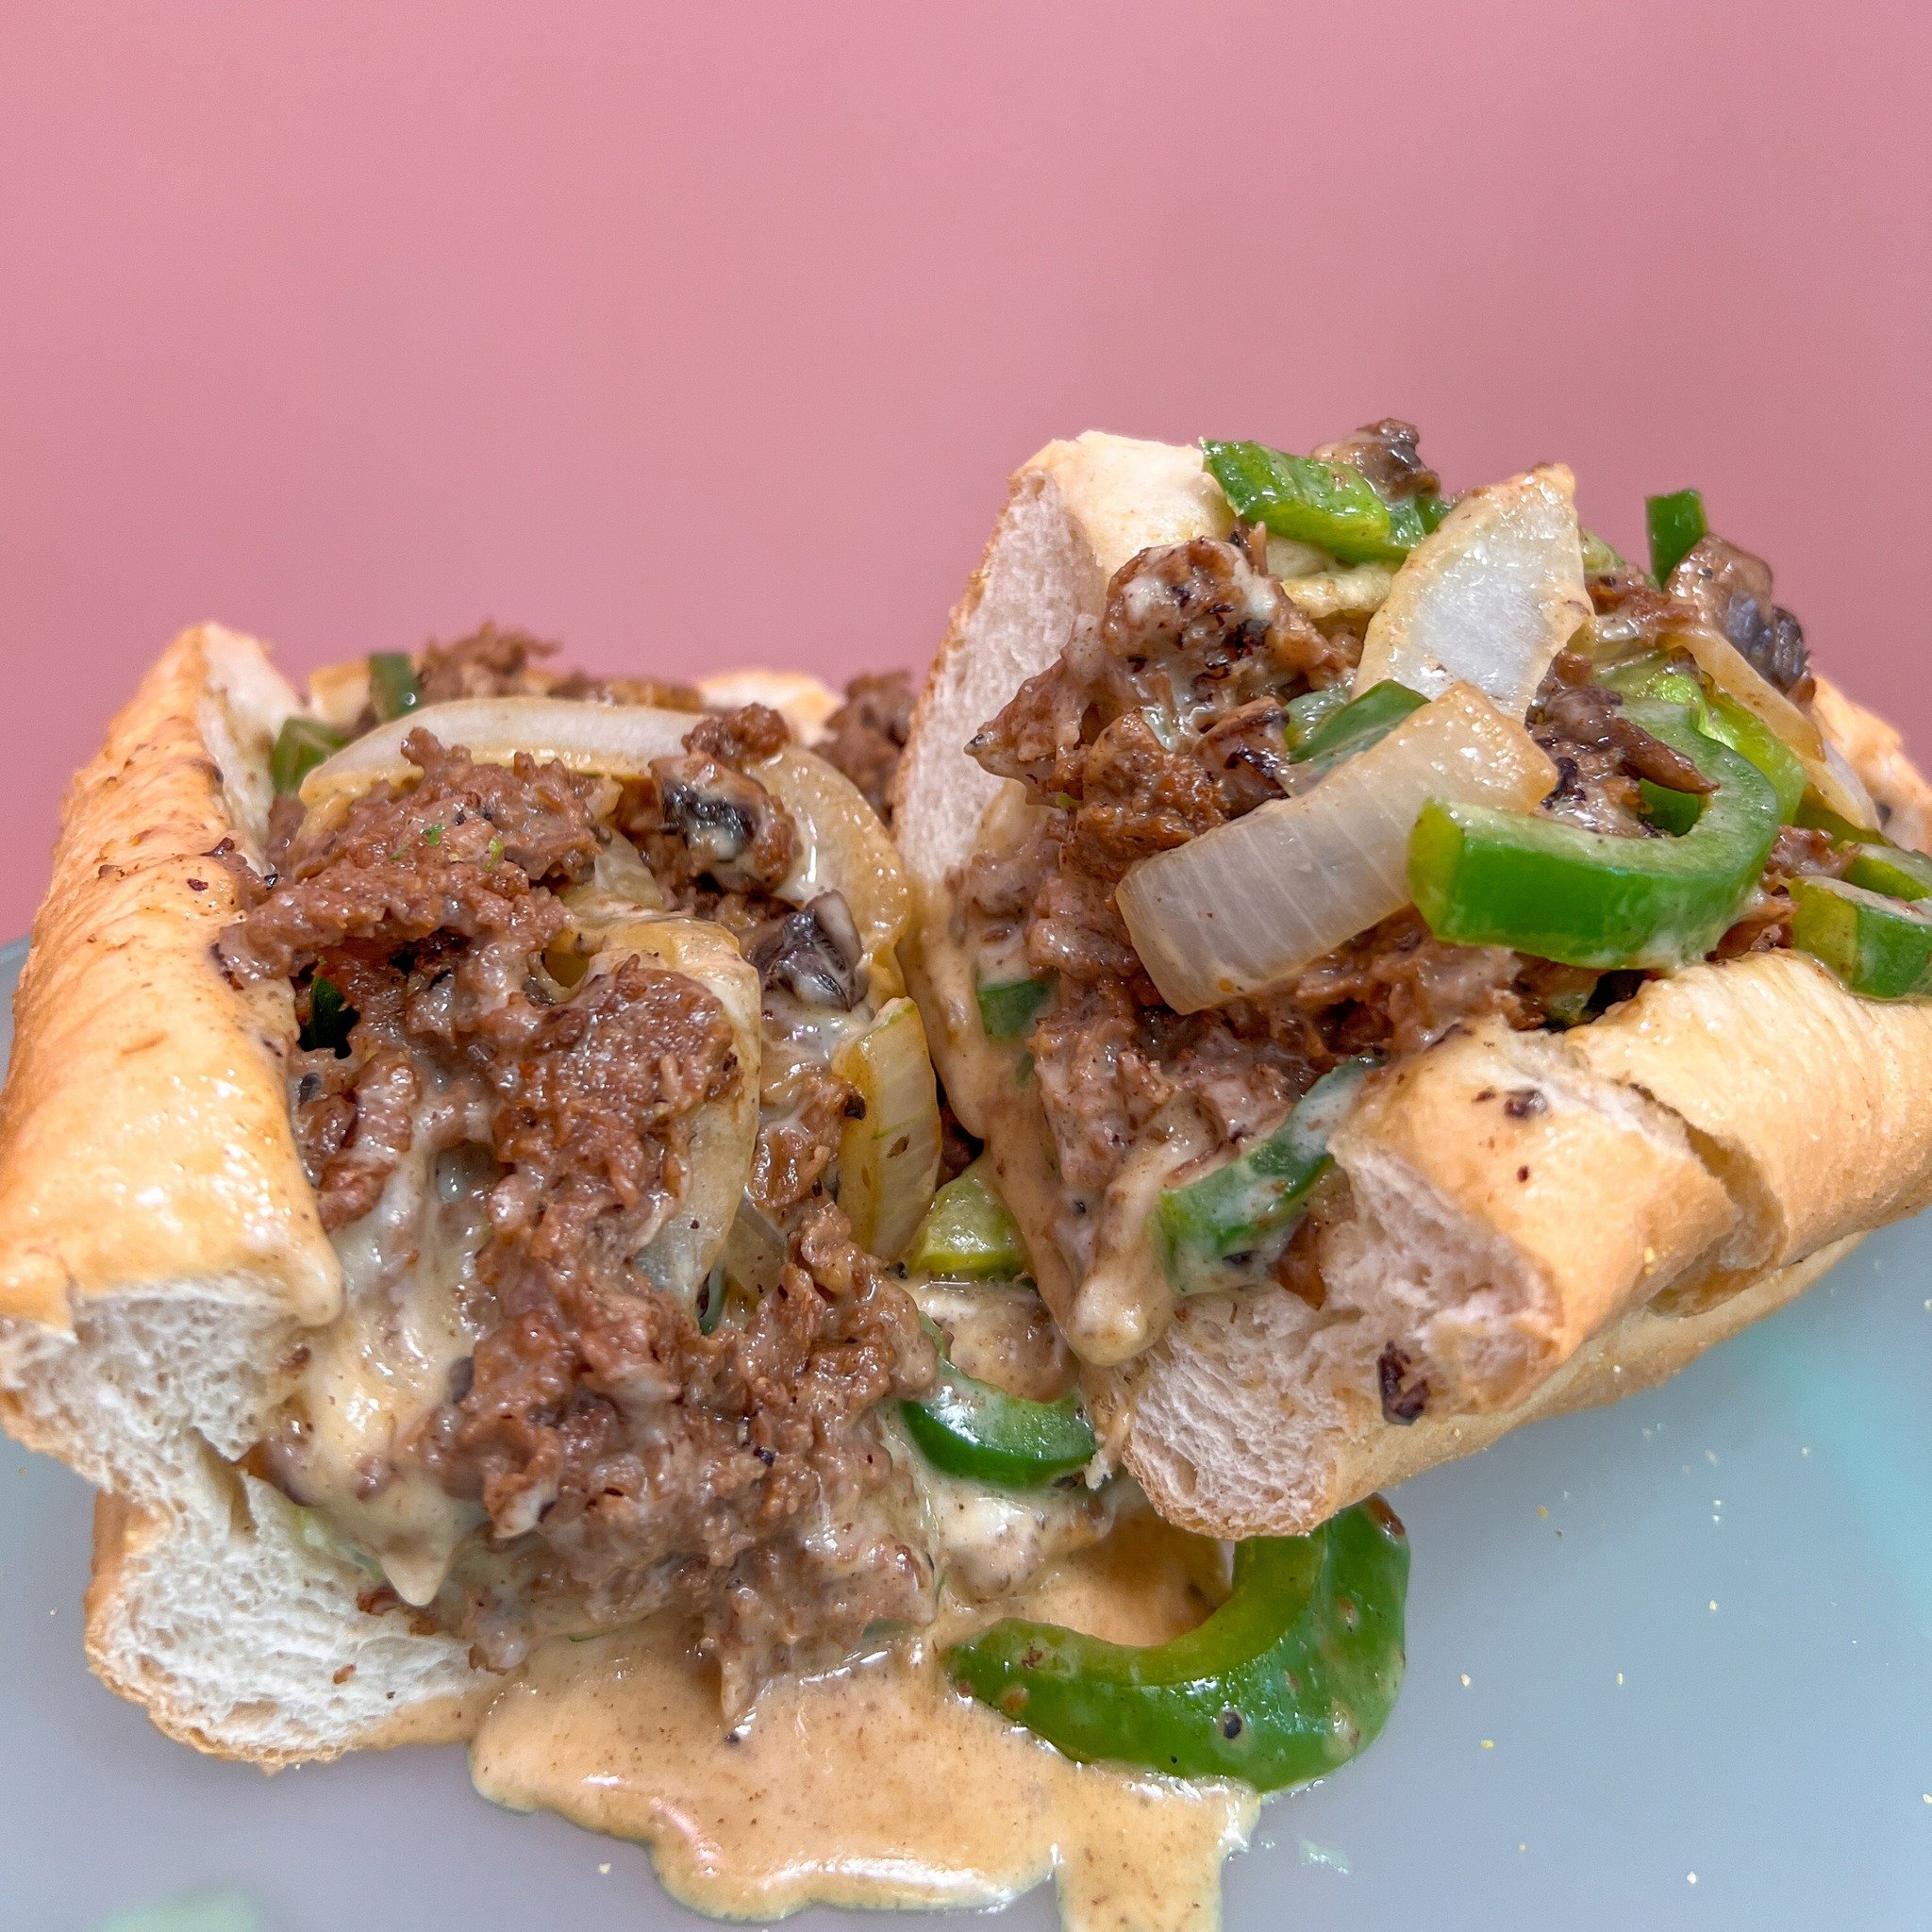 We're just going to let the photo speak for itself here 😮&zwj;💨🤤🤤

Loaded cheesesteaks on deck in Bath every day 😋

☀️ Bath open 10-5, call/text your order ahead 207-321-9443
💕 Portland open 9-4, call/text your order ahead 207-536-4932
⚓️ BIW o